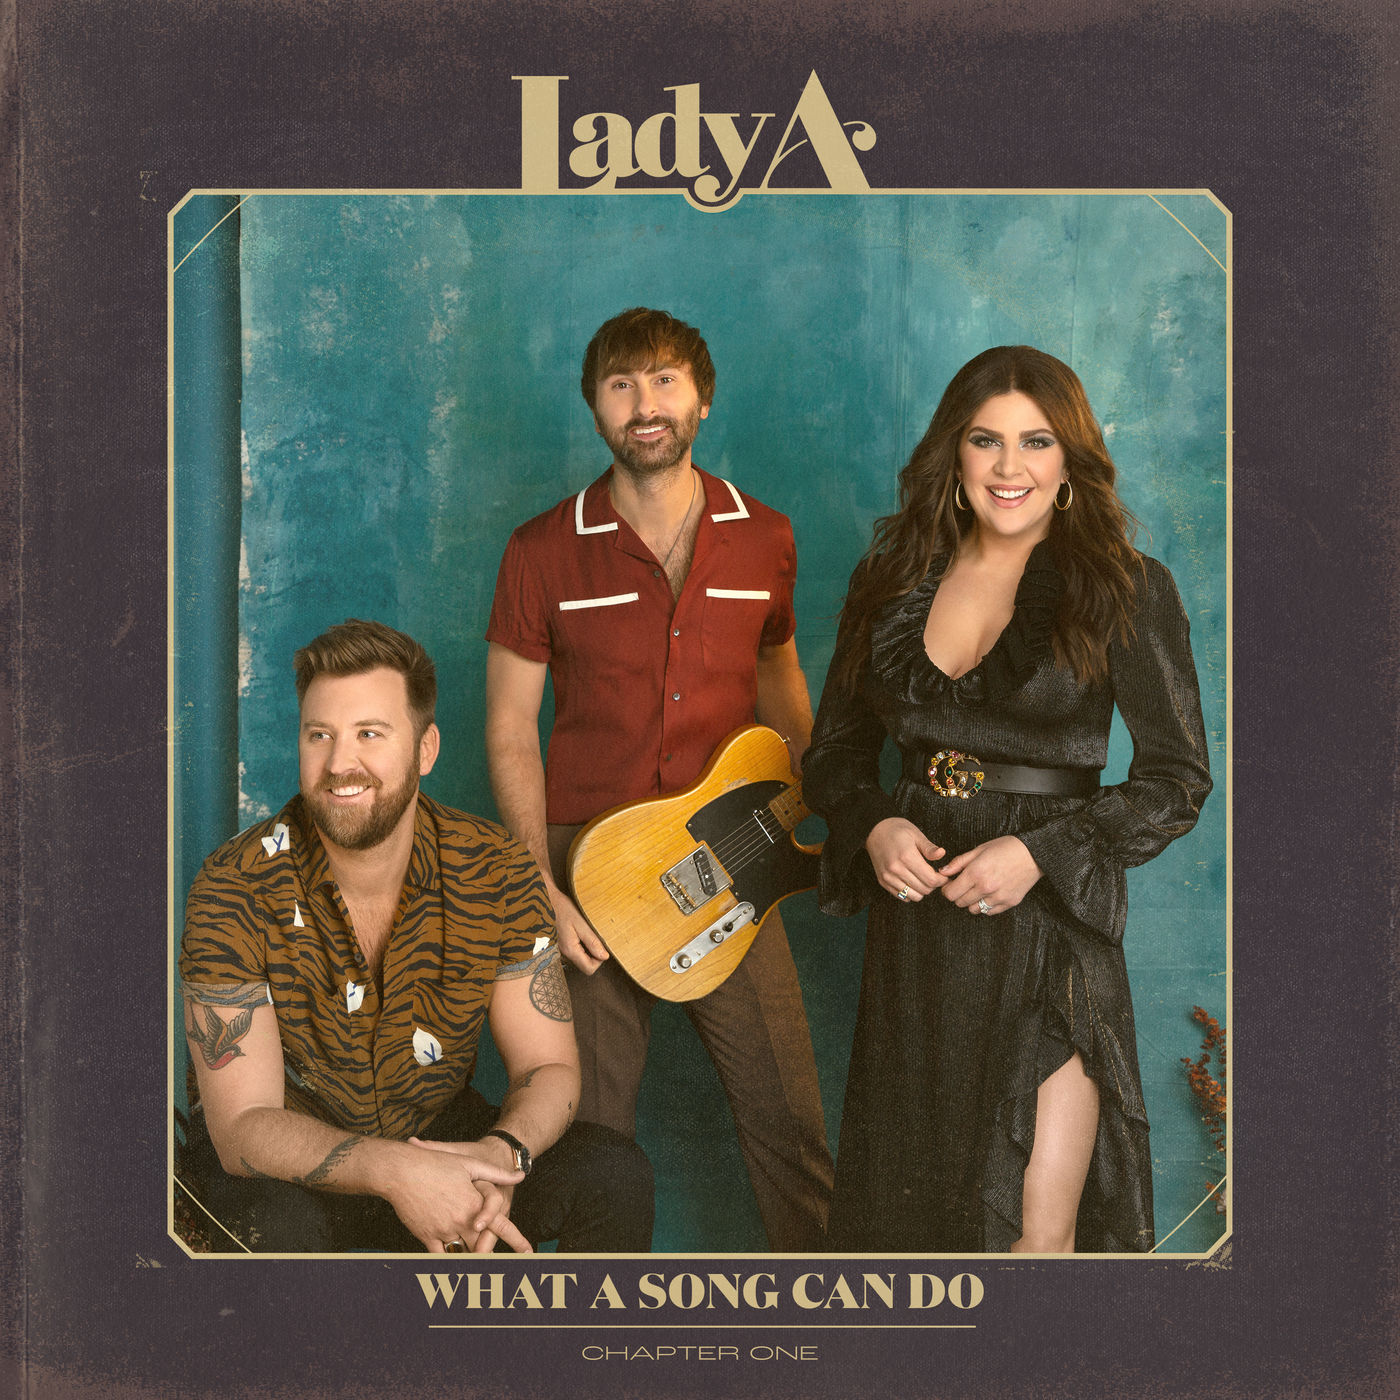 Lady A - What A Song Can Do (Chapter One) (2021) [FLAC 24bit/48kHz]